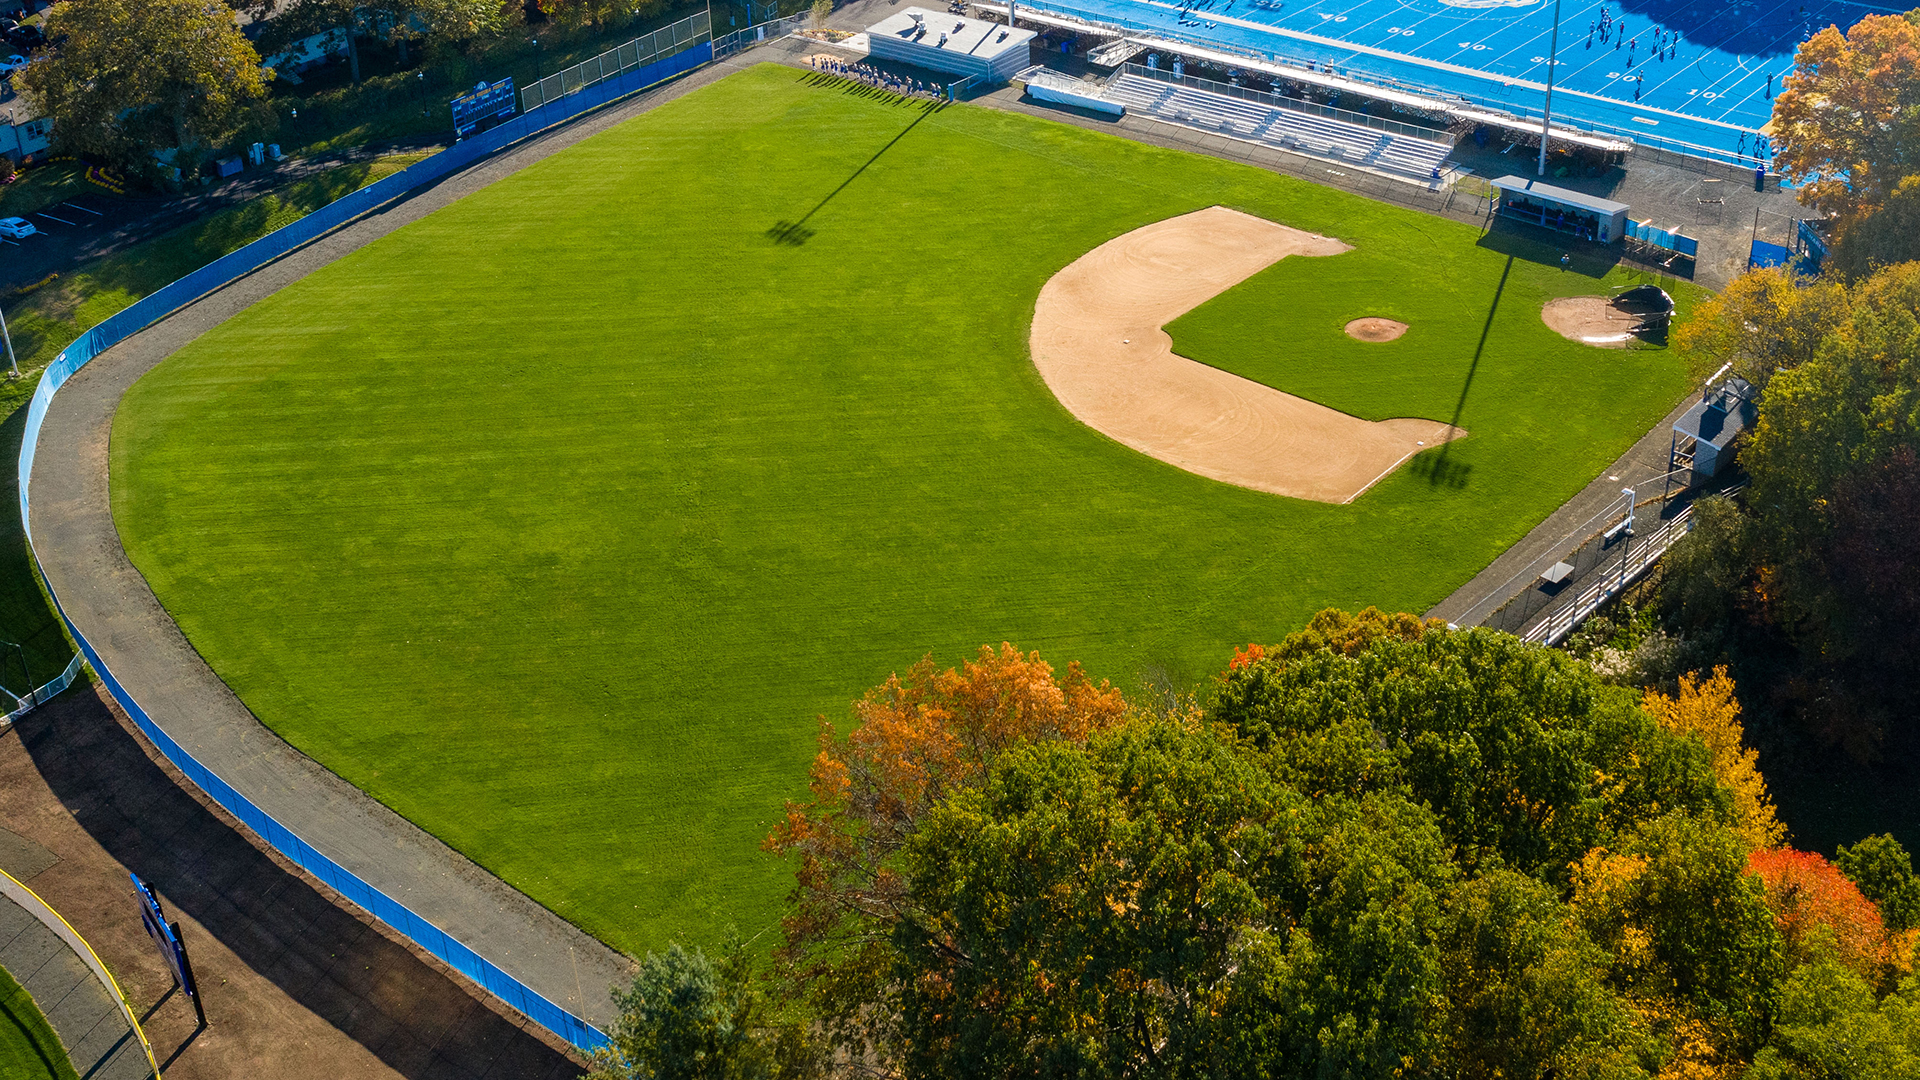 New Havens Frank Vieira Field (Courtesy of New Haven Athletics)